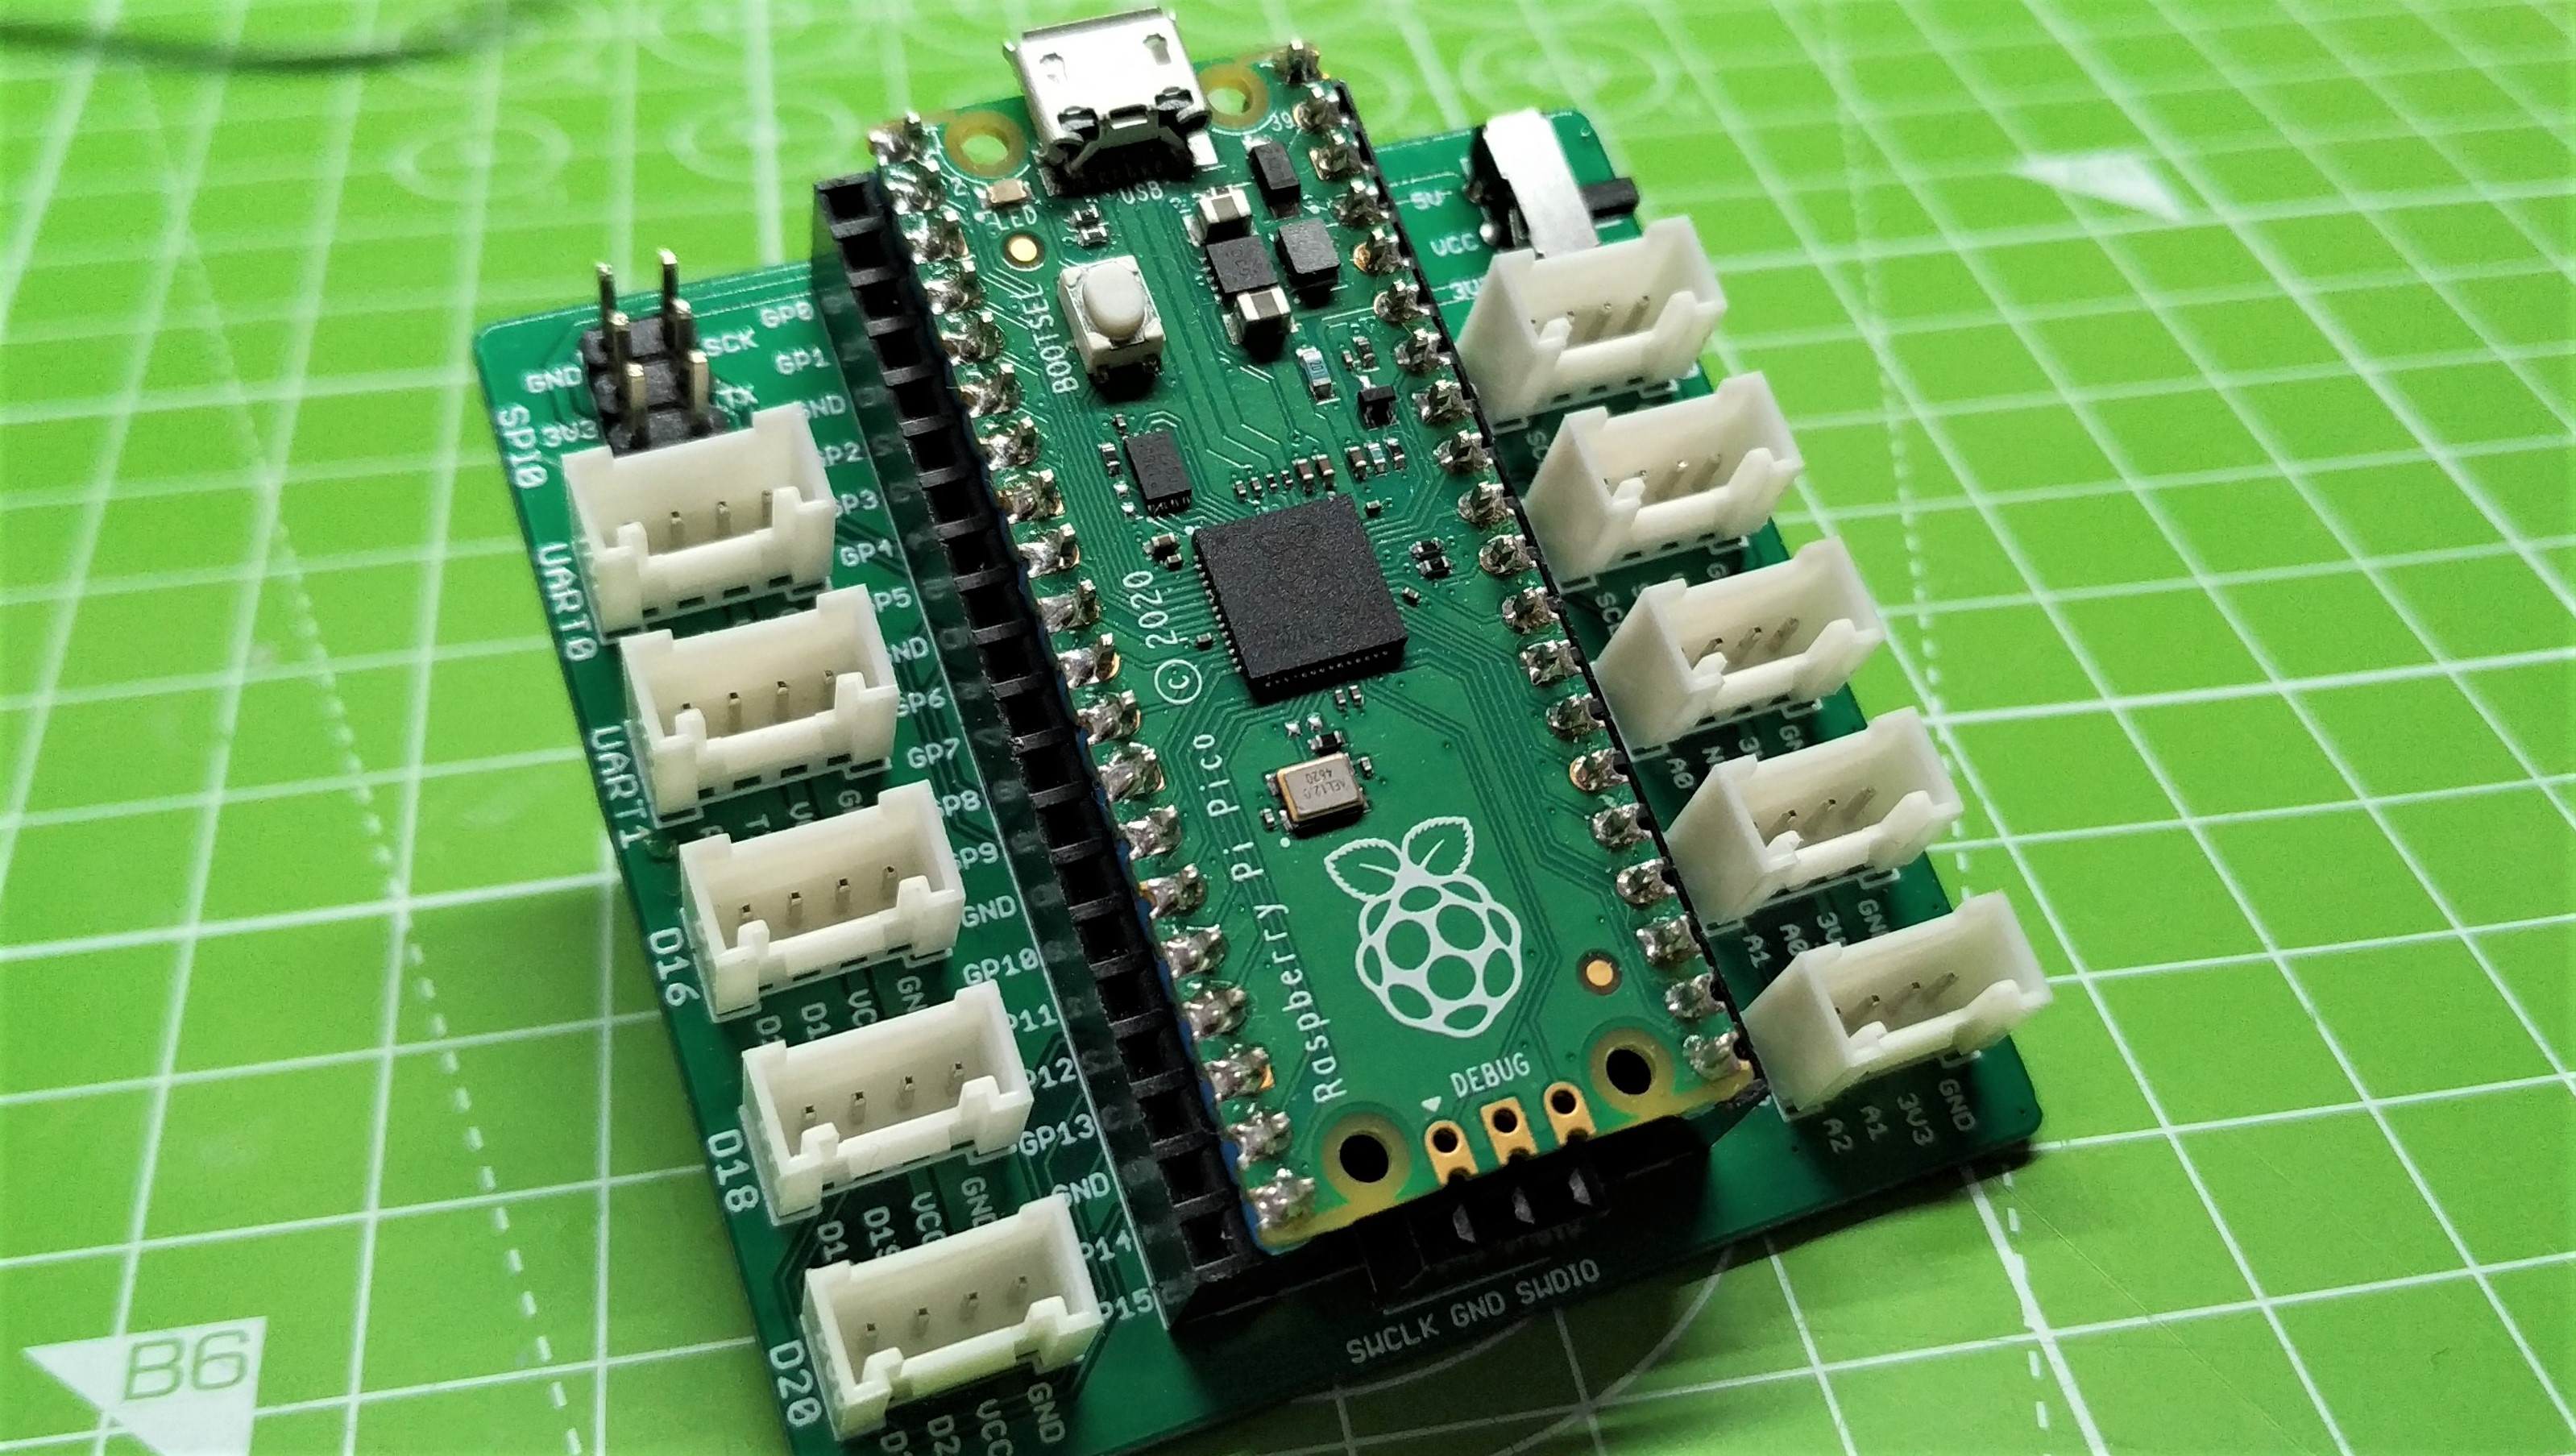 Best Introduction to Grove for Raspberry Pi Pico: Seeed Grove Shield for Raspberry Pi Pico